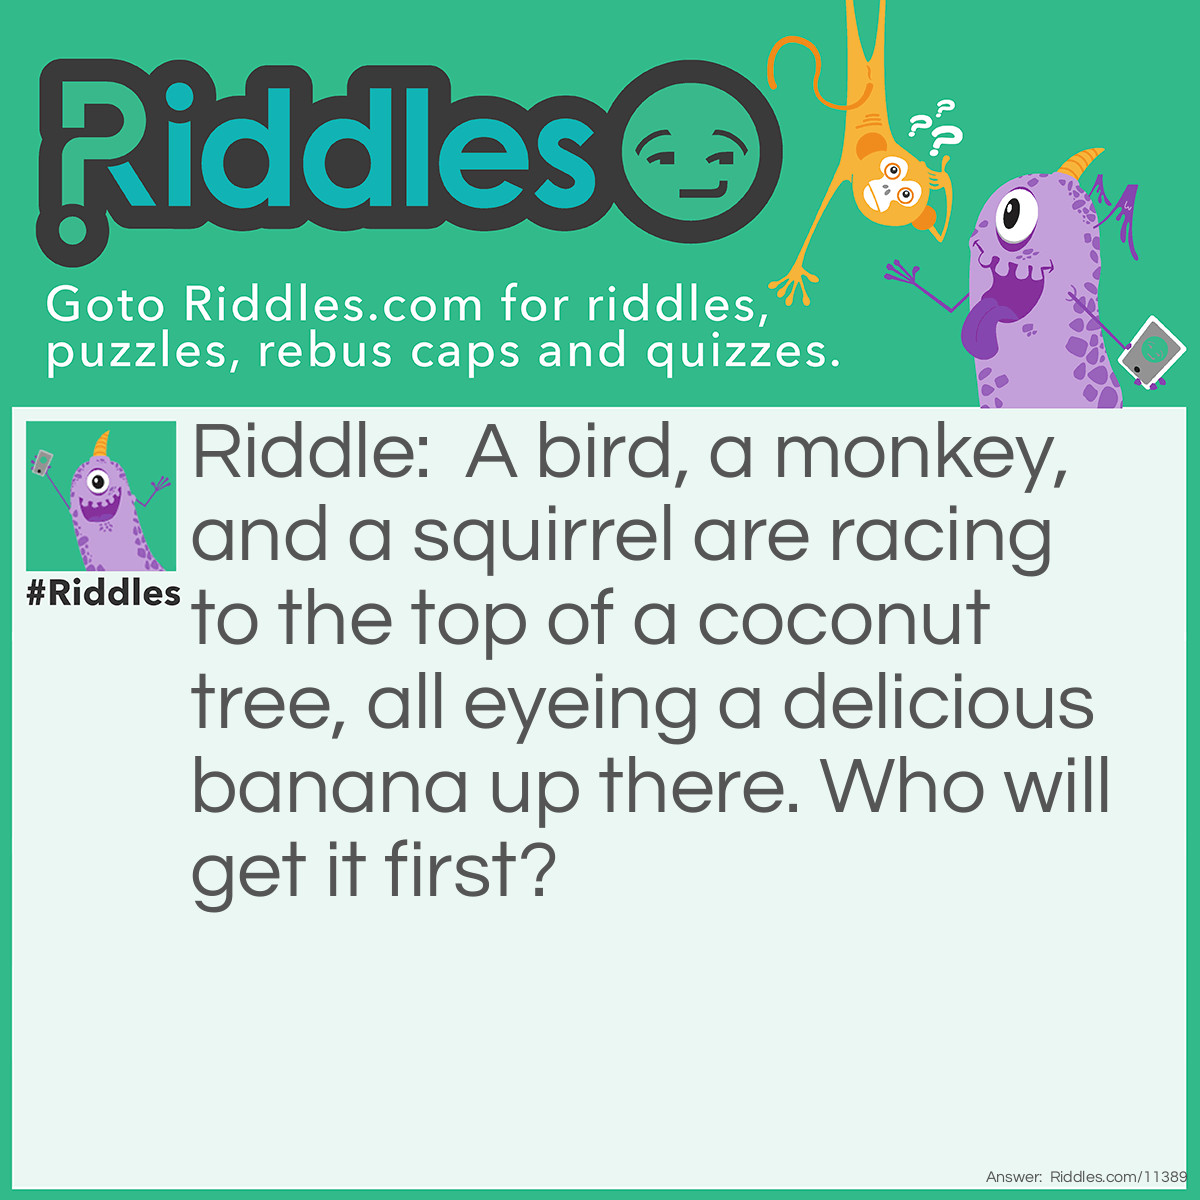 Riddle: A bird, a monkey, and a squirrel are racing to the top of a coconut tree, all eyeing a delicious banana up there. Who will get it first? Answer: None of them, because there is no banana; bananas don't grow on coconut trees!